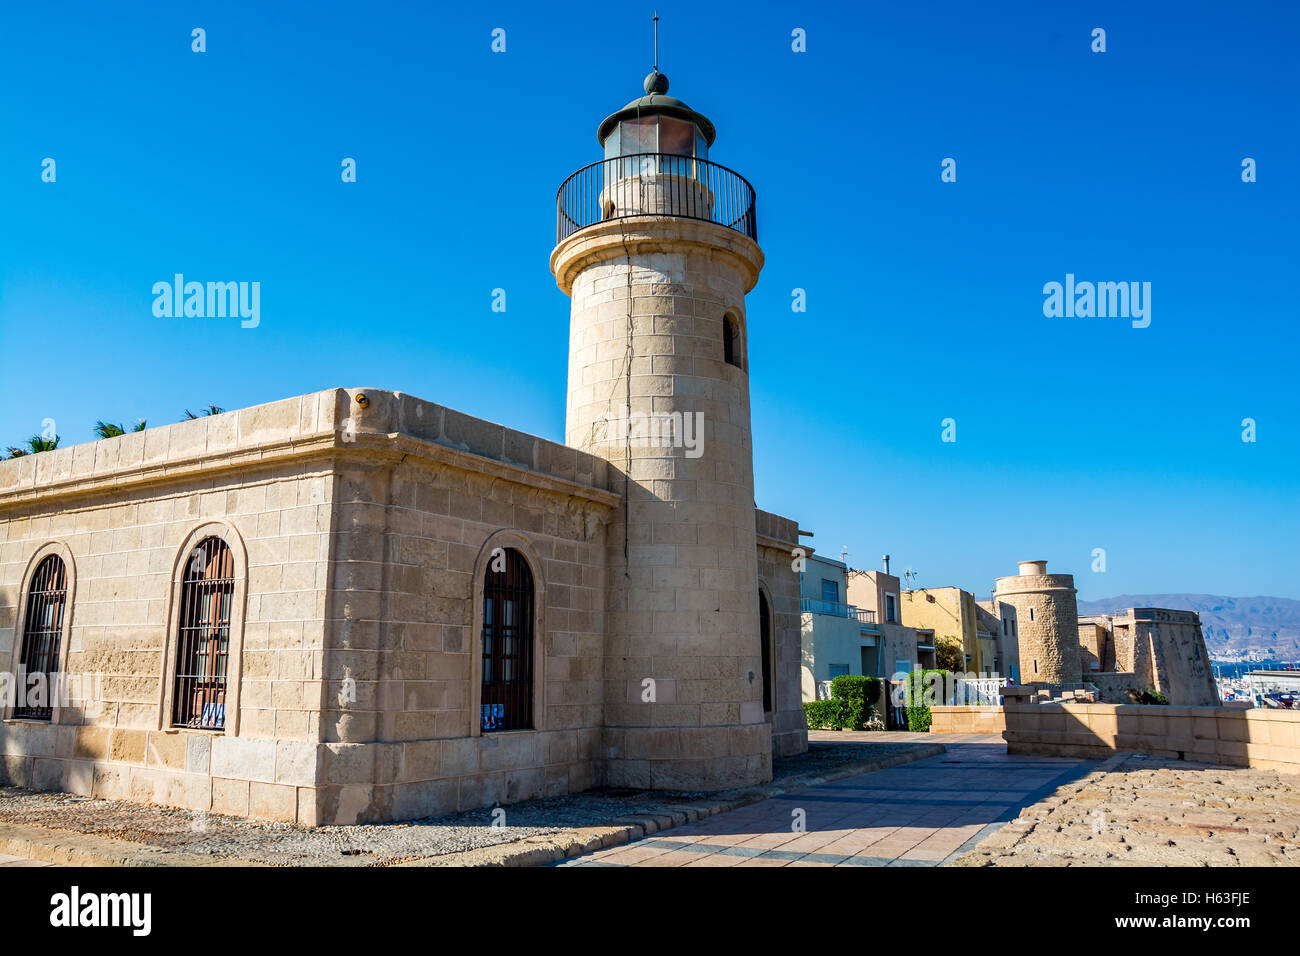 View of the lighthouse and fort in Roquetas de Mar, Almeria region, Costa Tropical, Spain Stock Photo